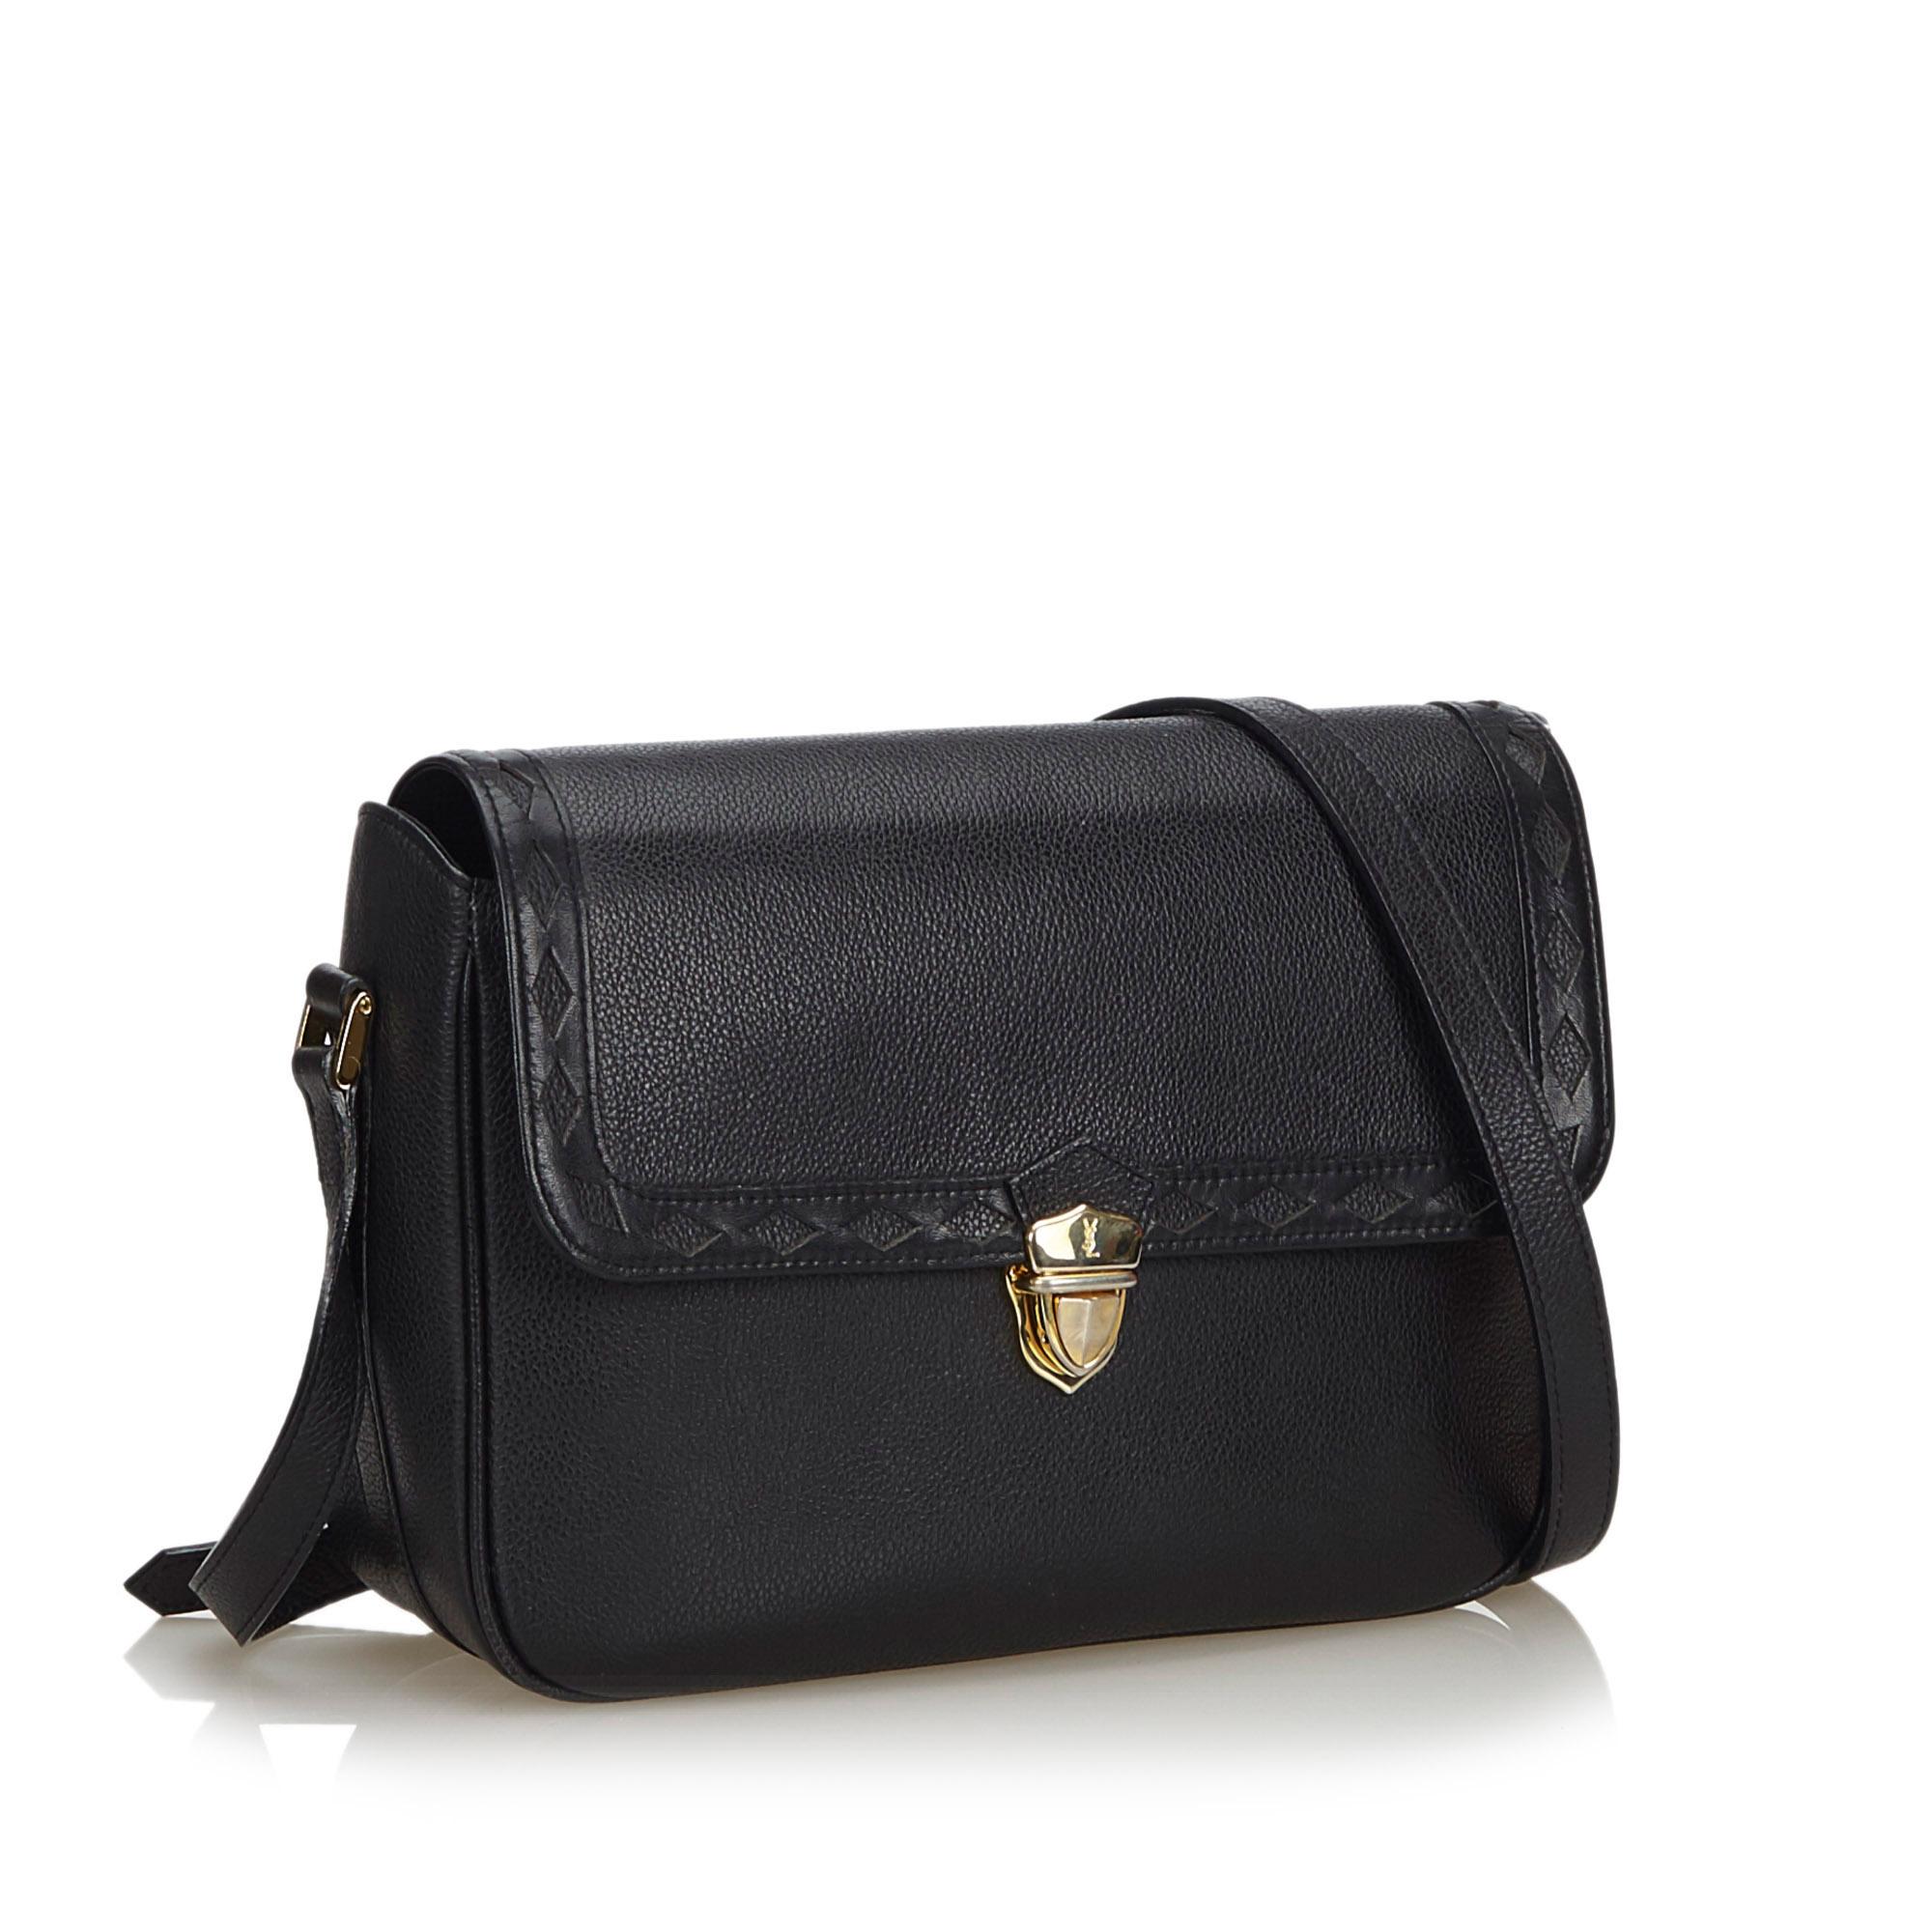 This crossbody bag features a leather body, a flat leather strap, a top flap with a push lock closure, and interior zip and slip pockets. It carries as B+ condition rating.

Inclusions: 
This item does not come with inclusions.

Dimensions:
Length: